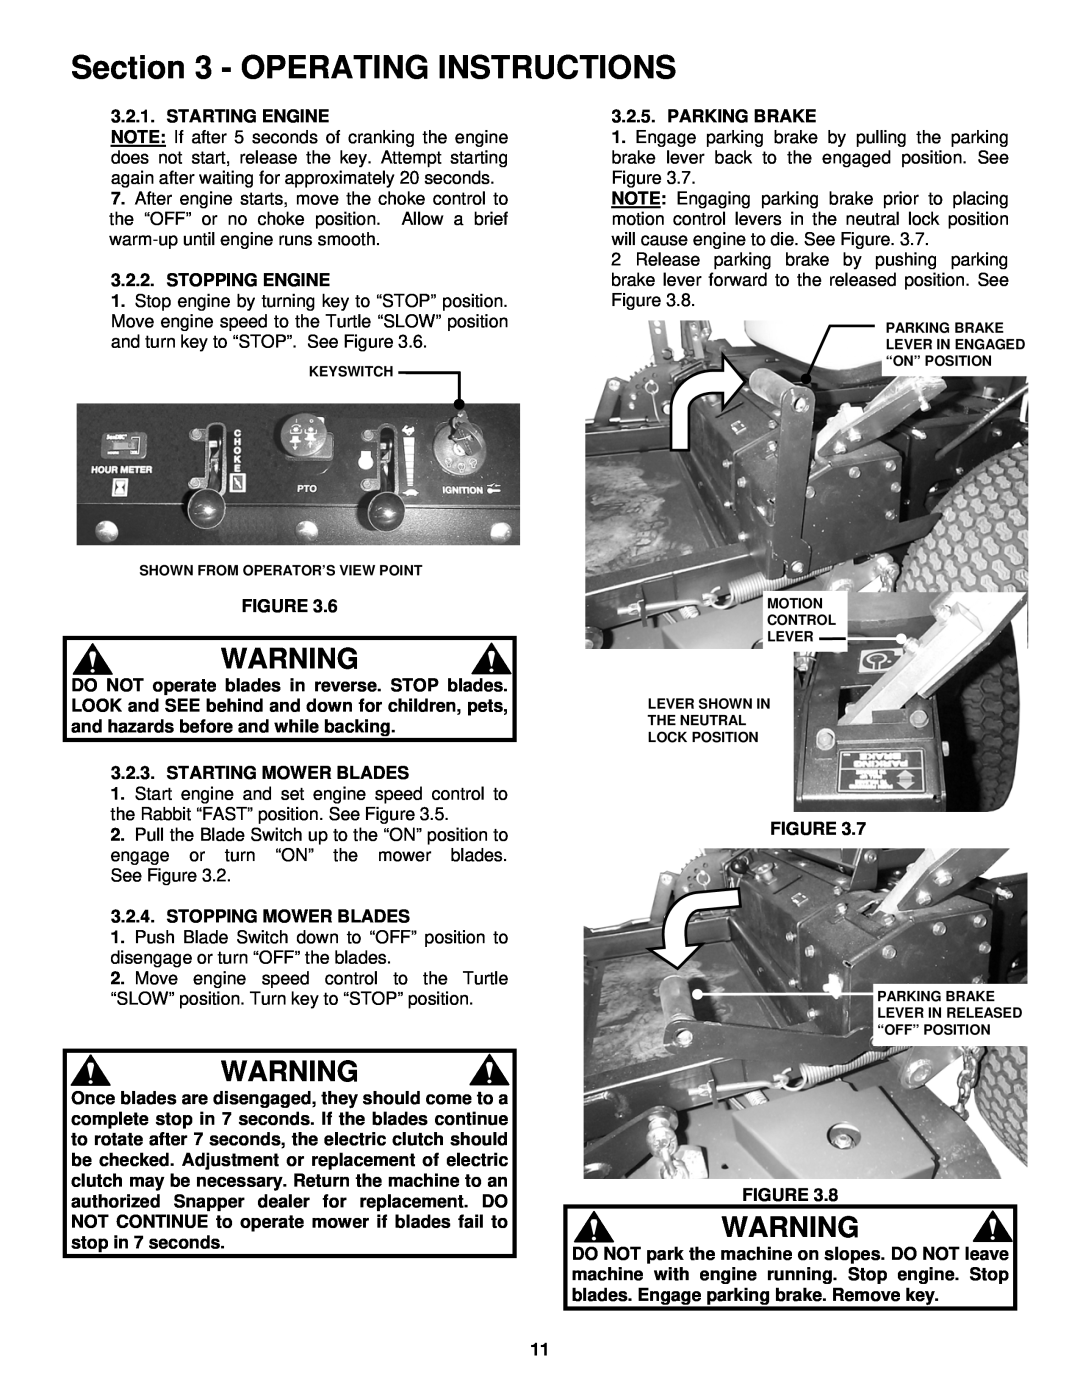 Snapper NZM19481KWV important safety instructions Operating Instructions, Keyswitch Shown From Operator’S View Point 